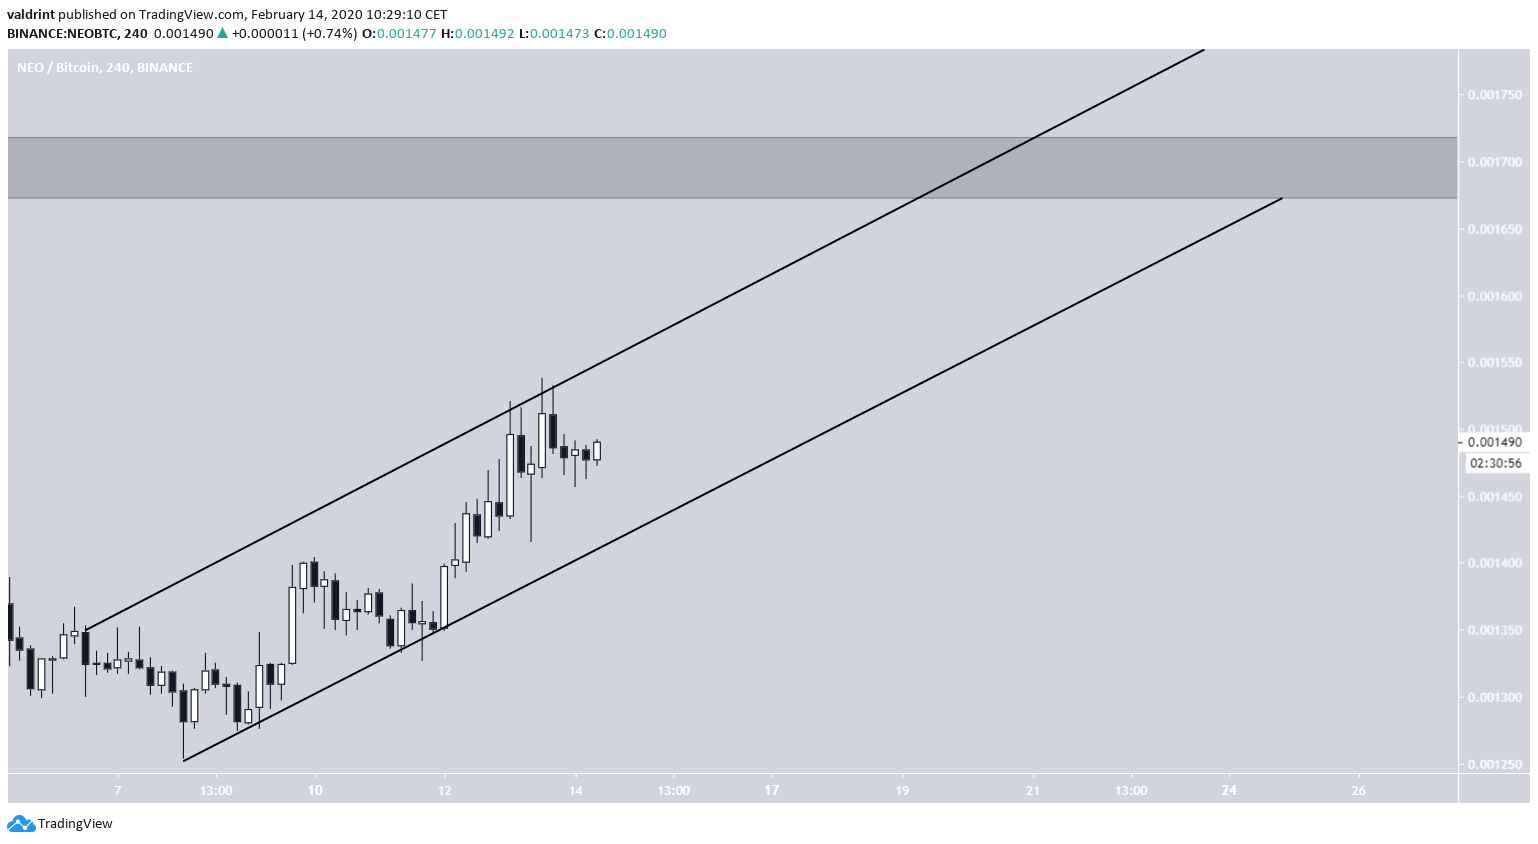 NEO Ascending Channel